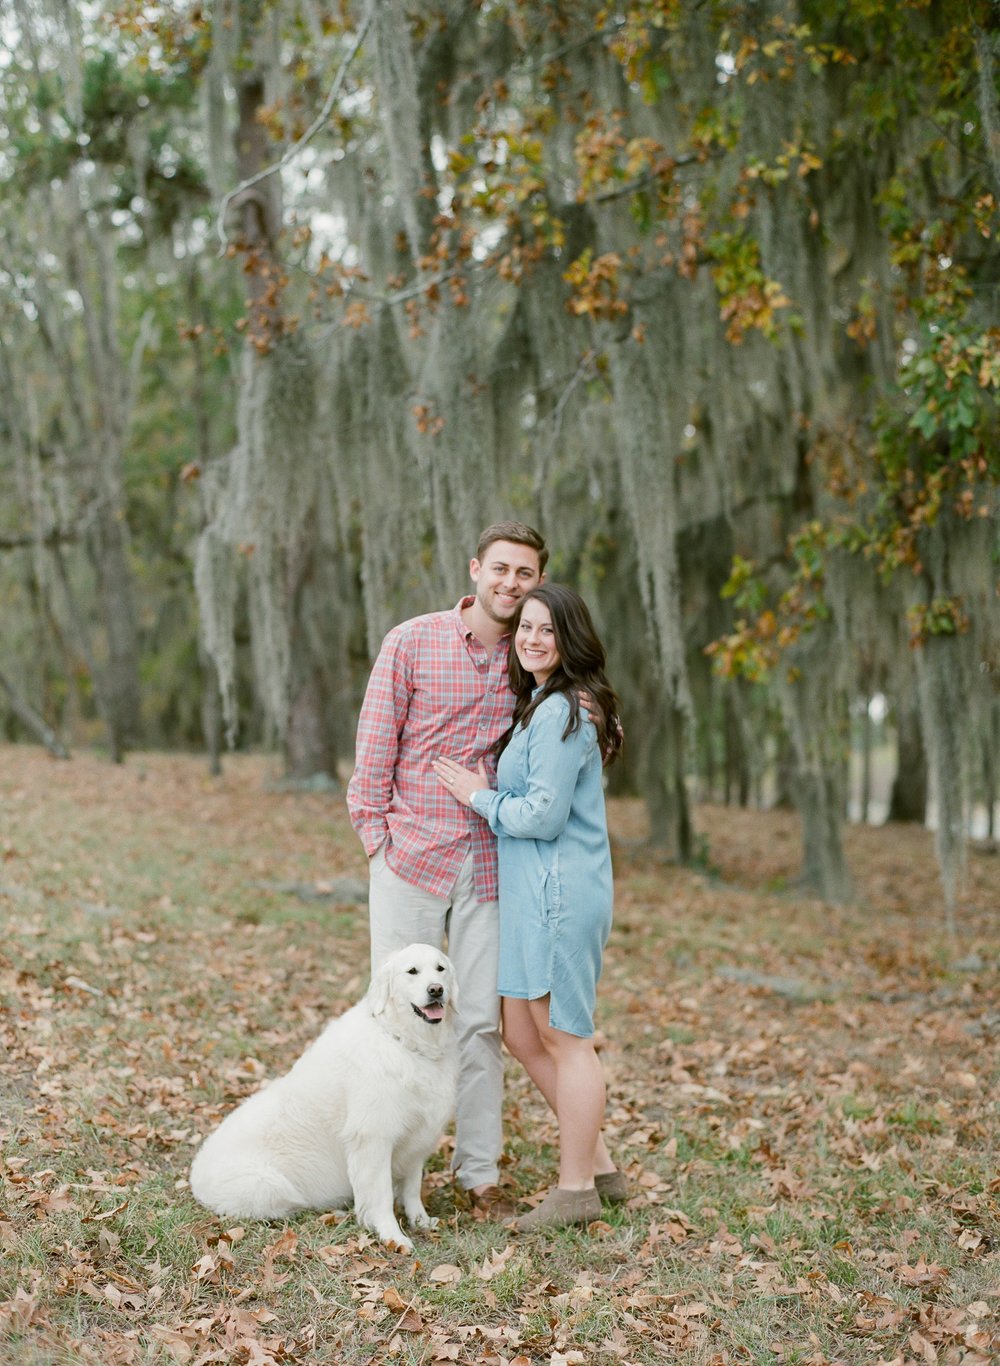  Engagement Session Pictures with Dog 